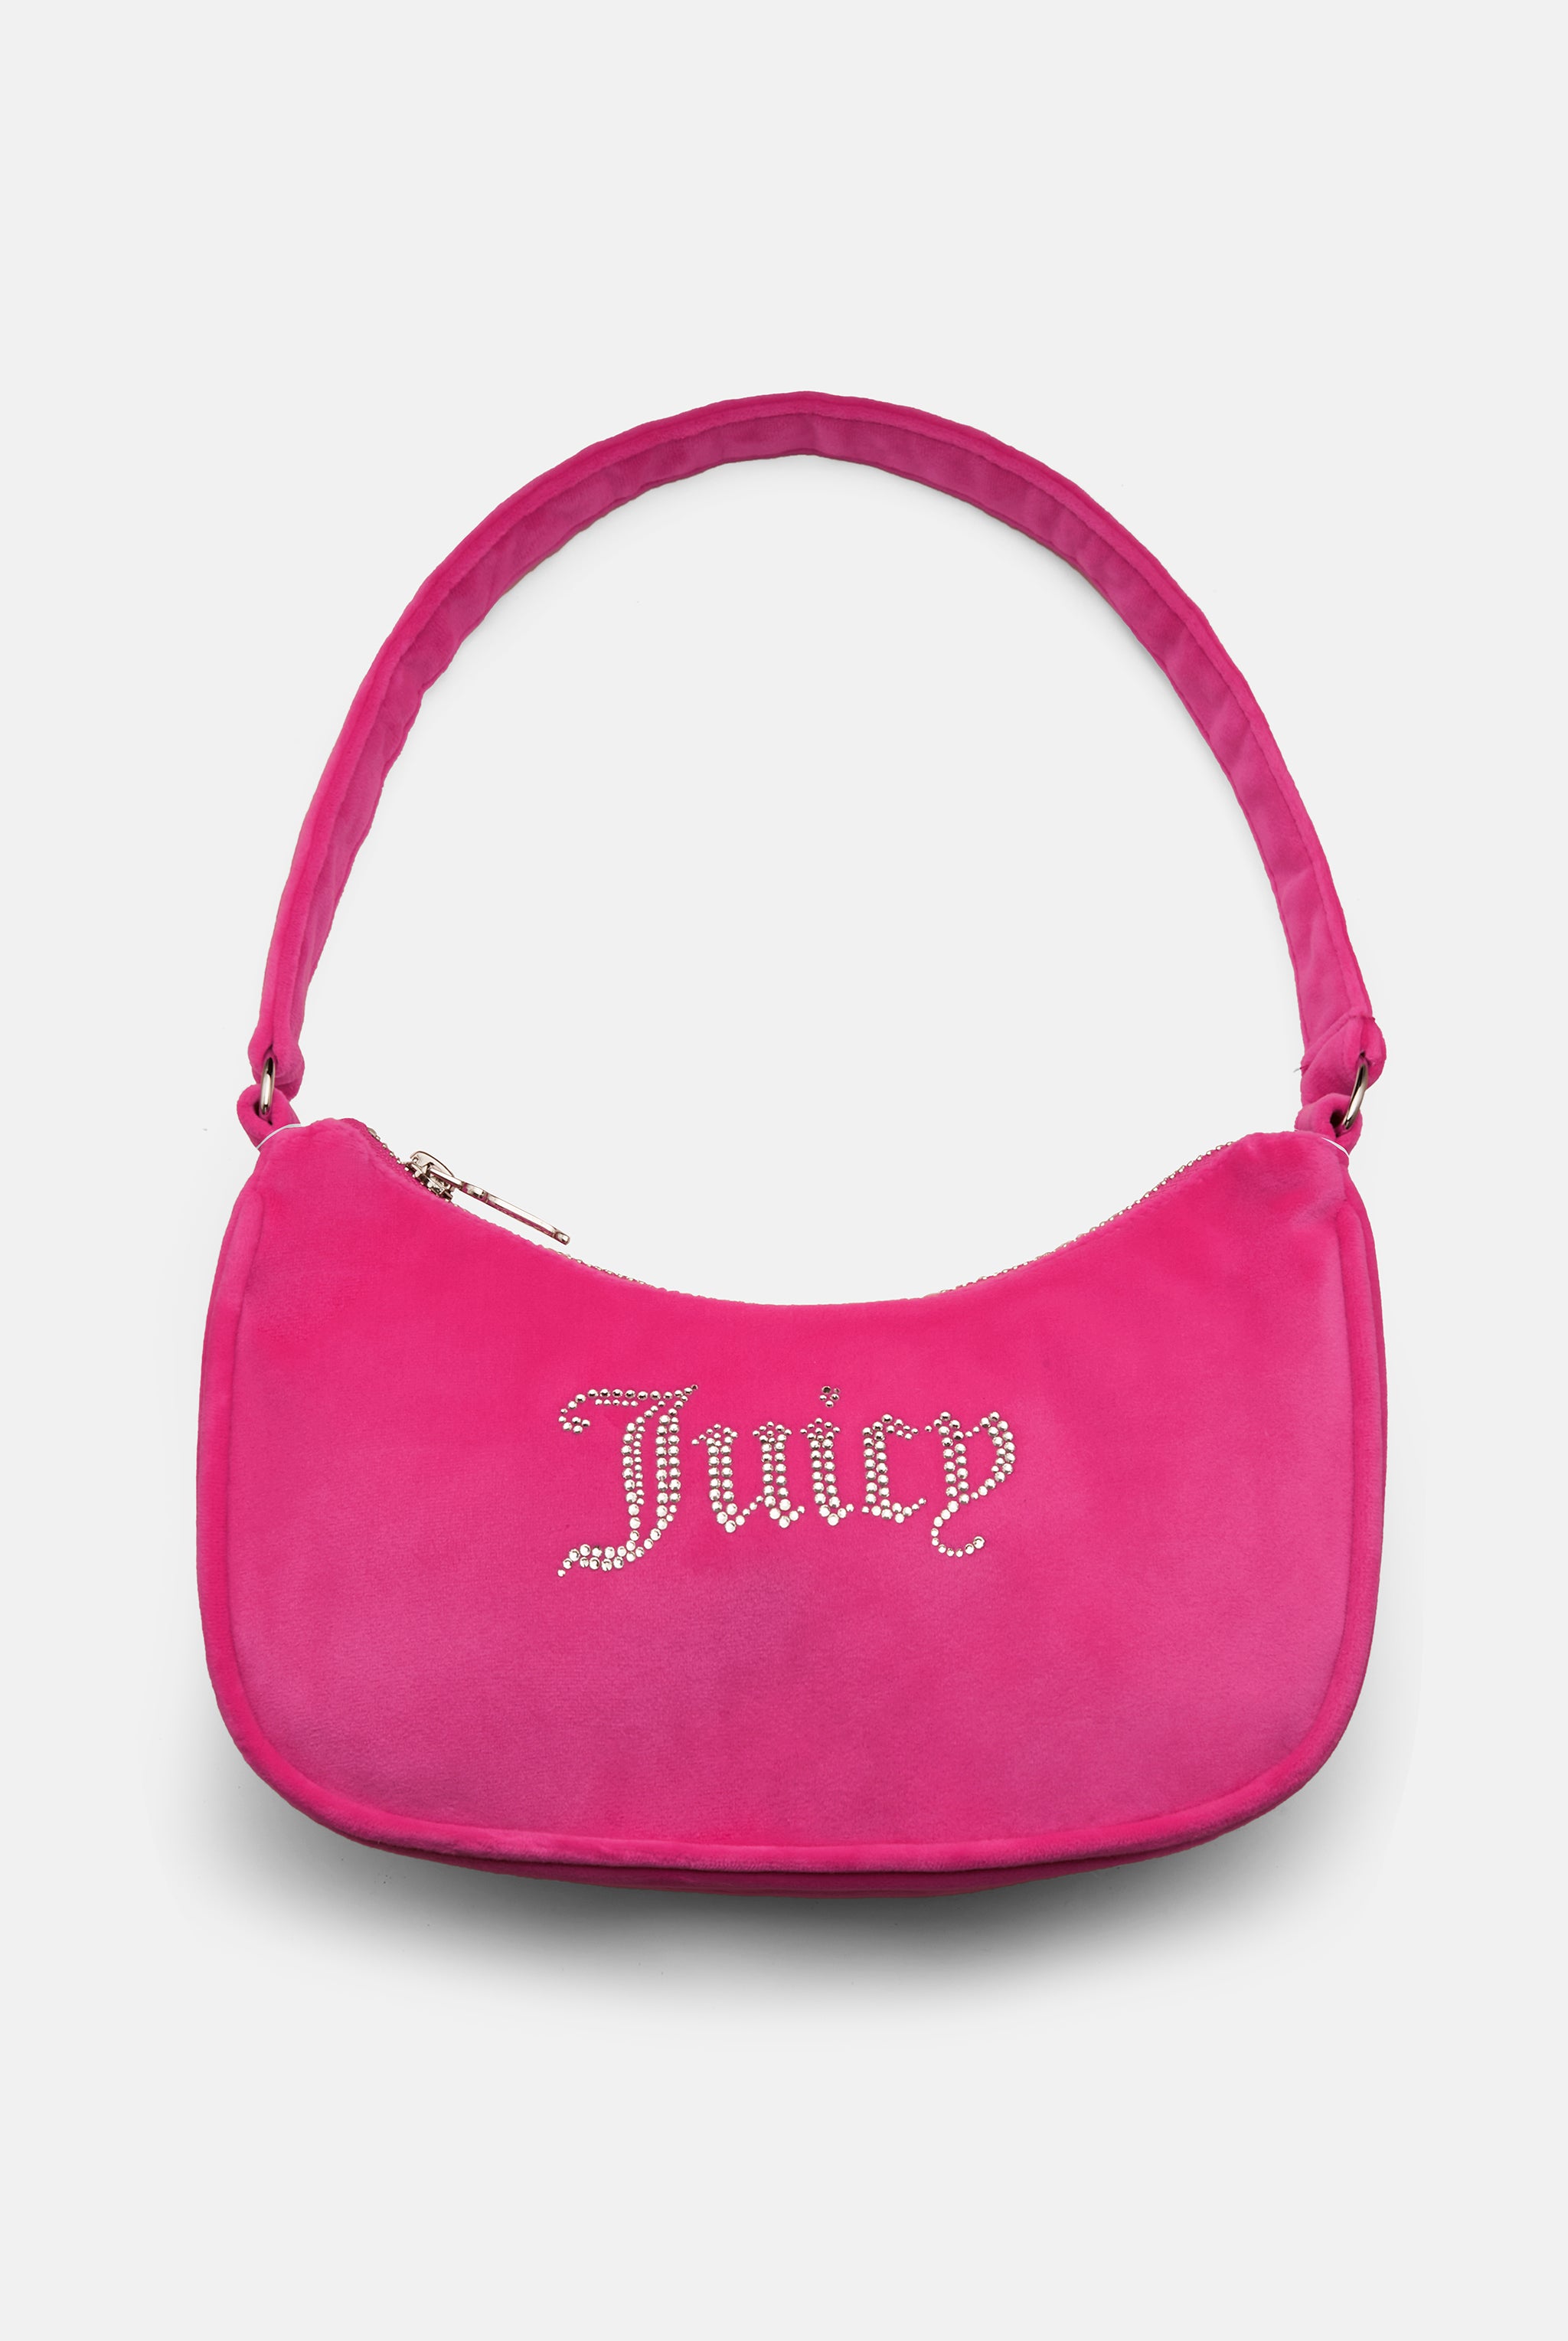 Juicy Couture Bags & Handbags for Women sale - discounted price | FASHIOLA  INDIA